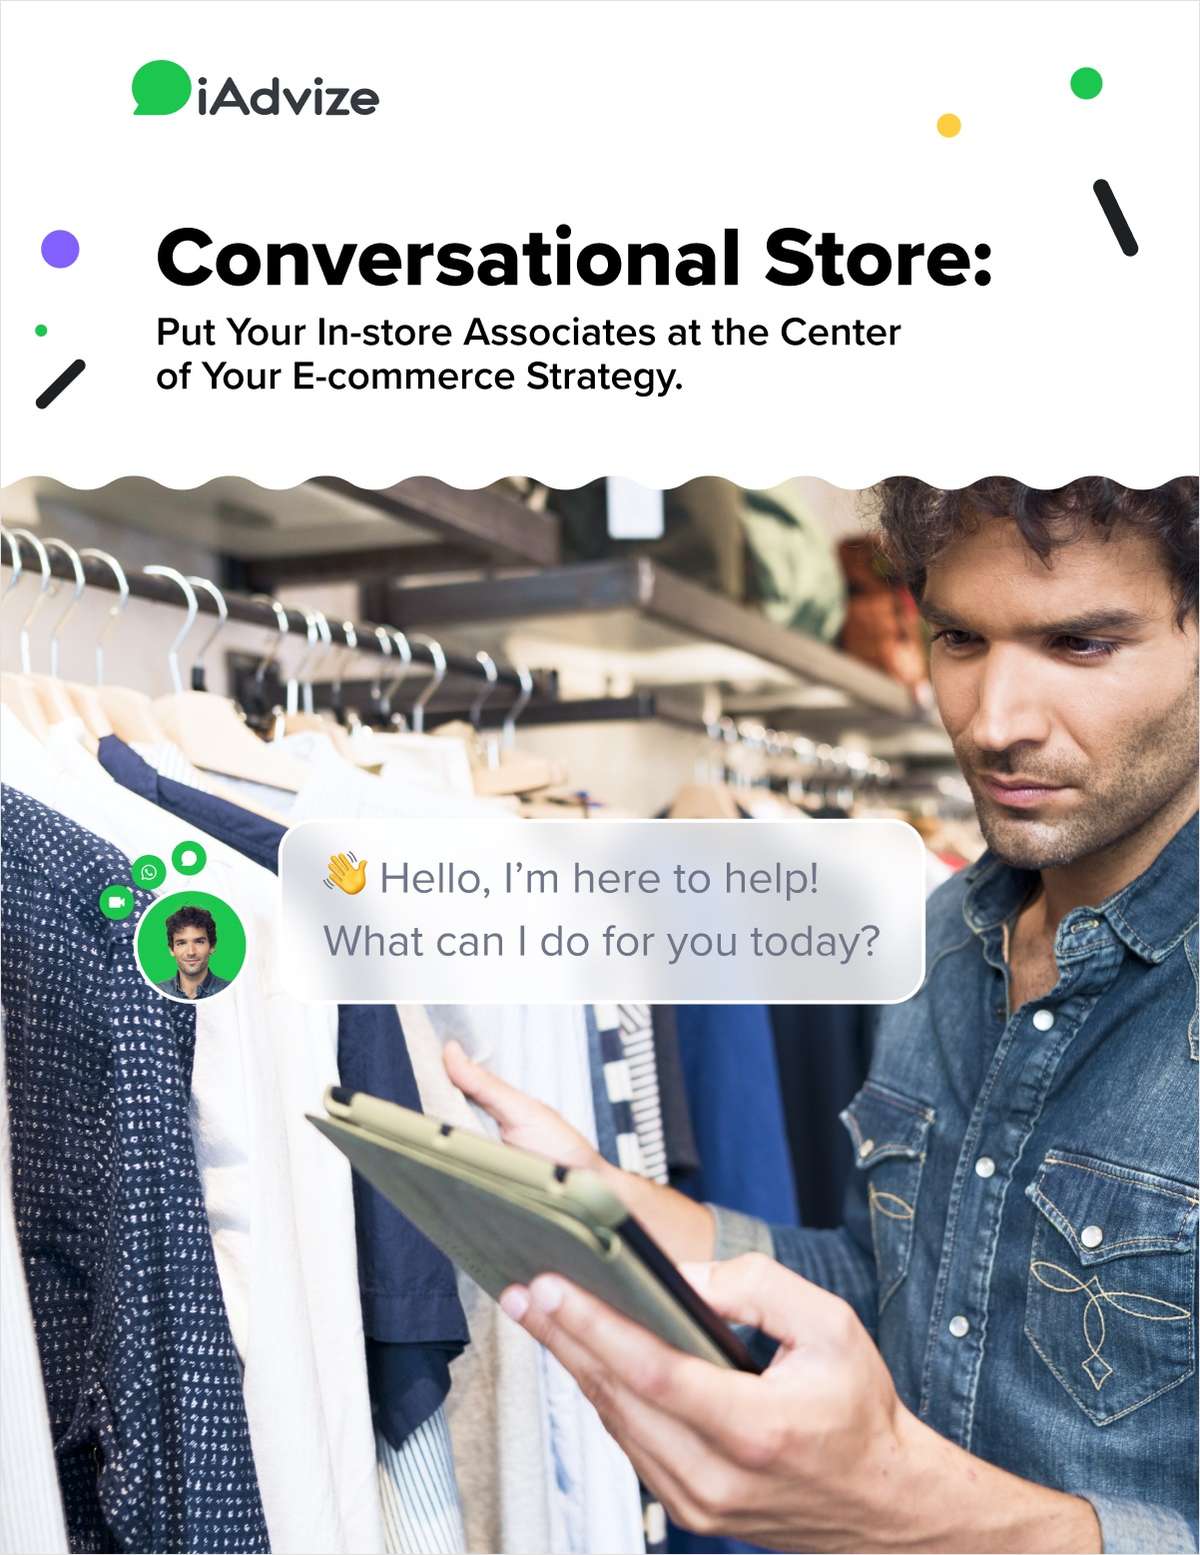 Put Your In-store Associates at the Center of Your E-commerce Strategy